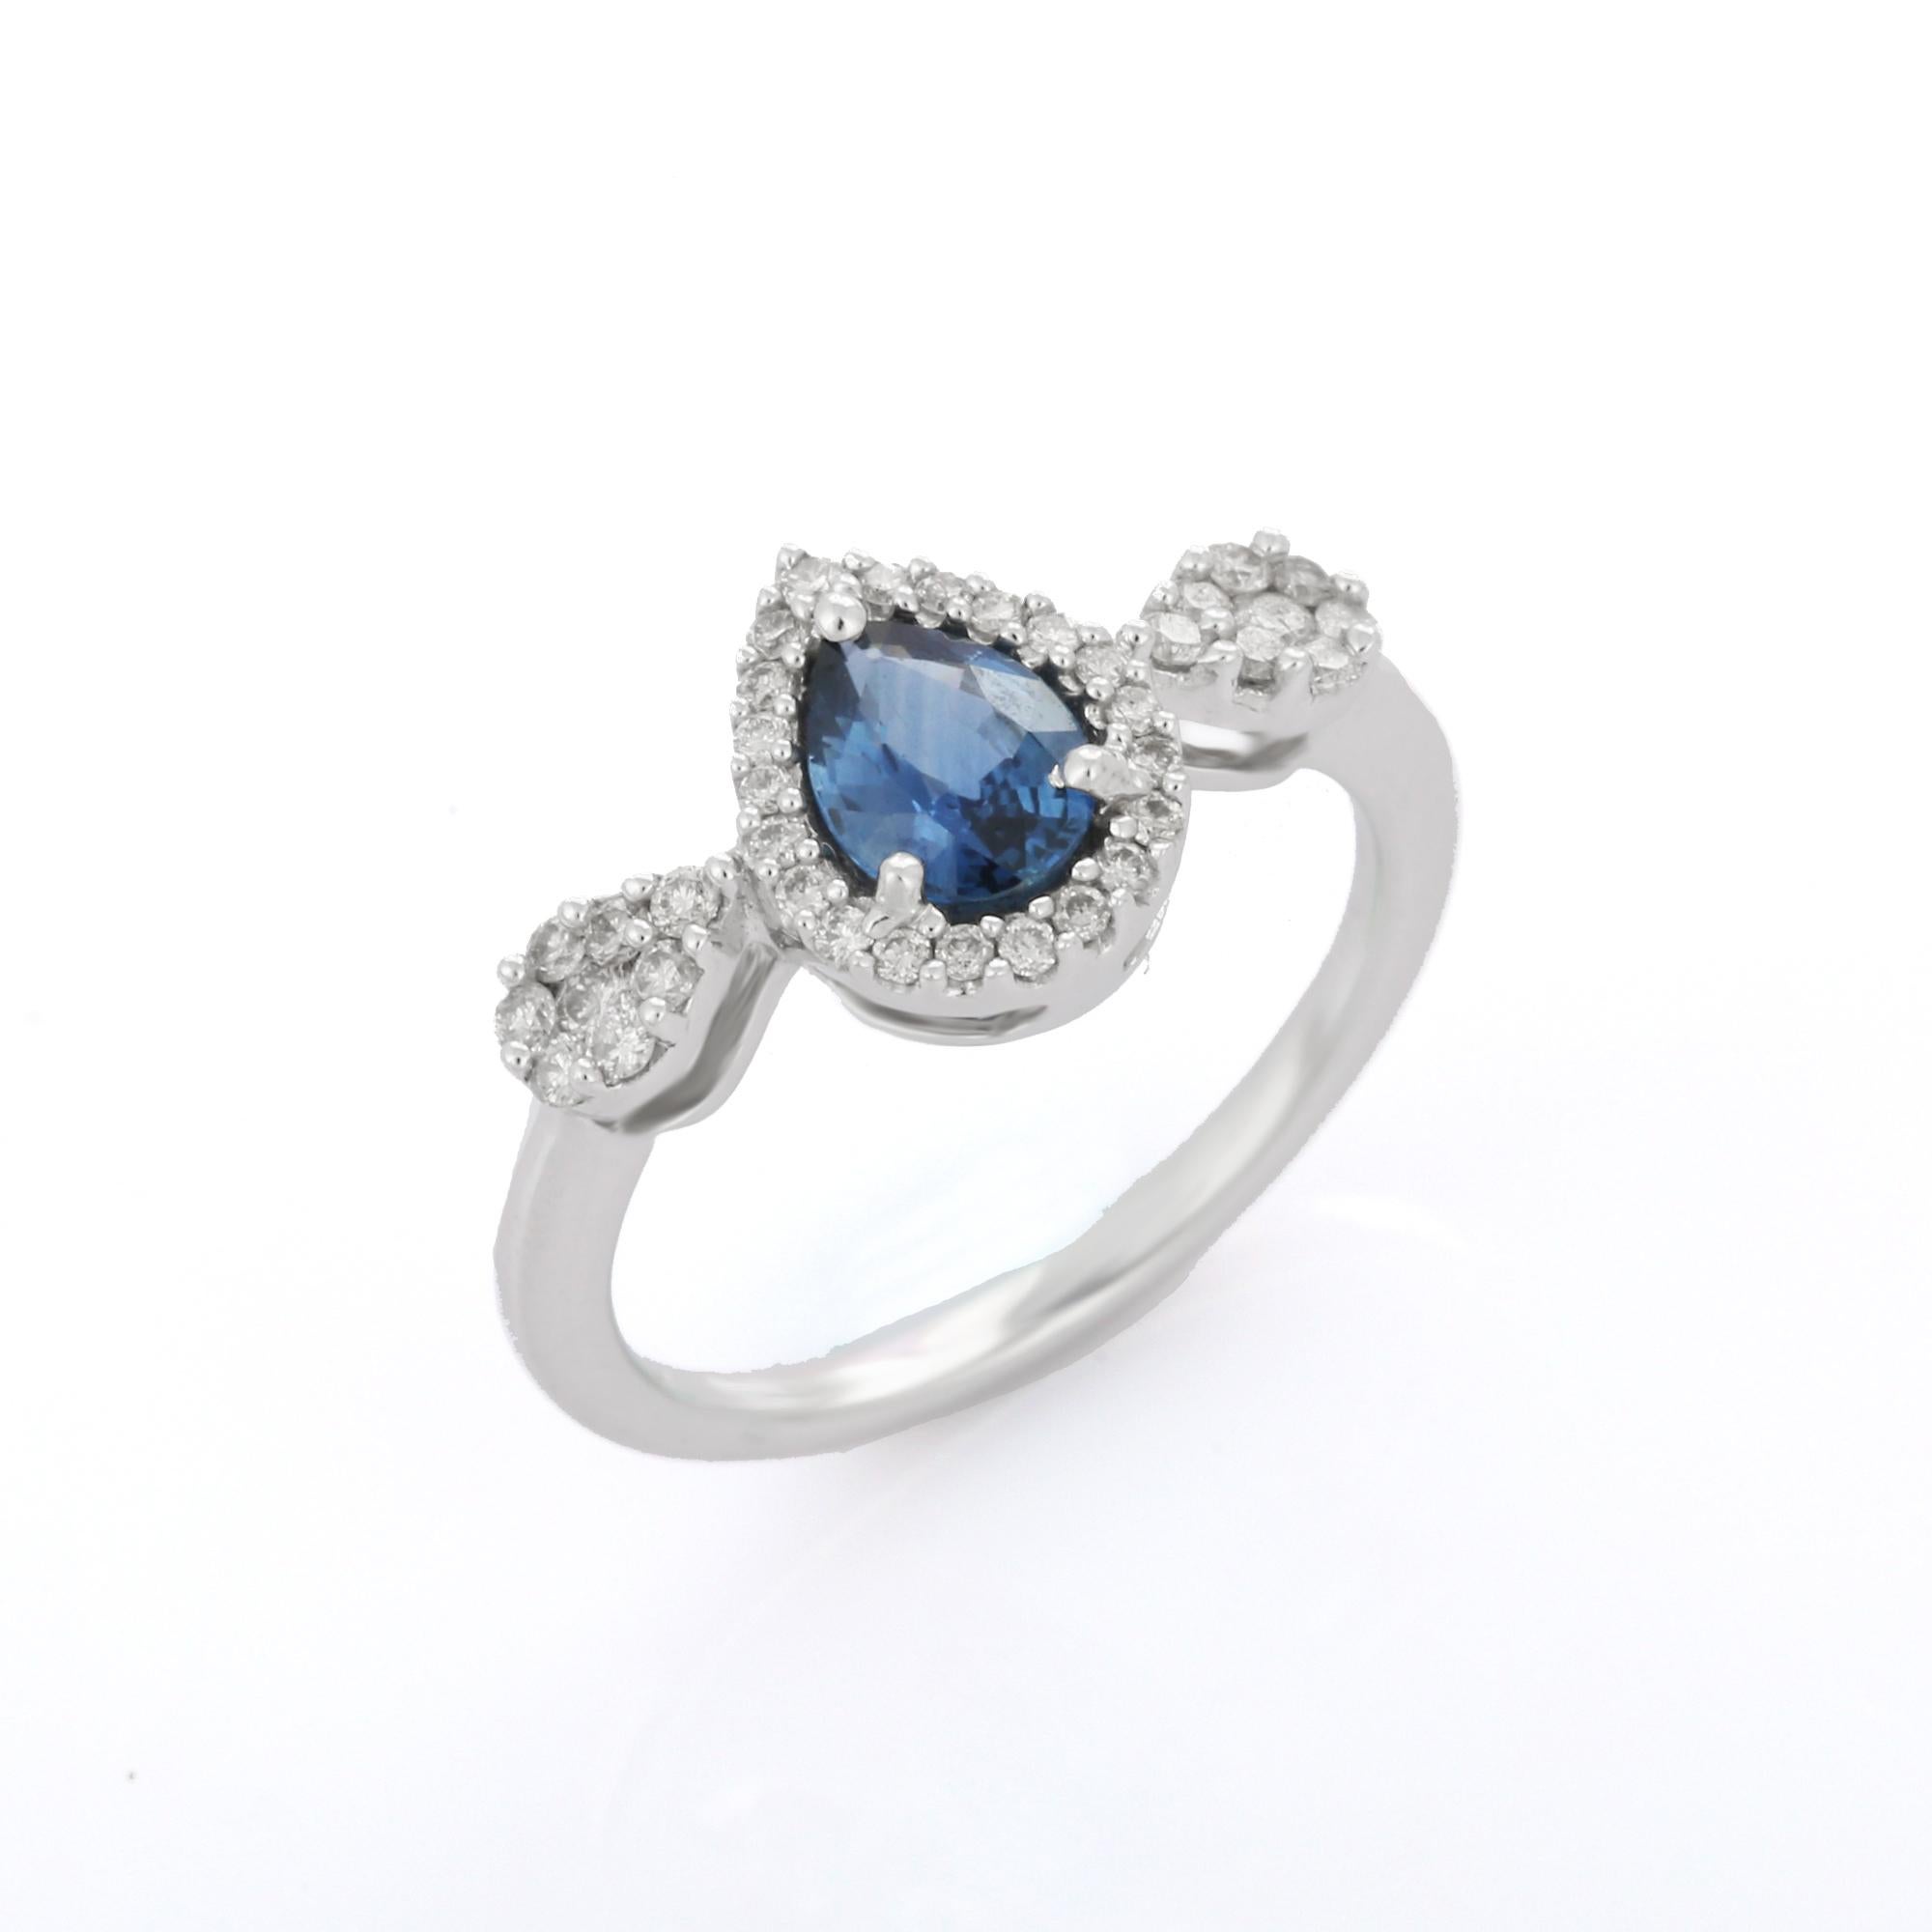 For Sale:  Blue Sapphire Engagement Ring, Ringed with Diamonds in 18K White Gold  5